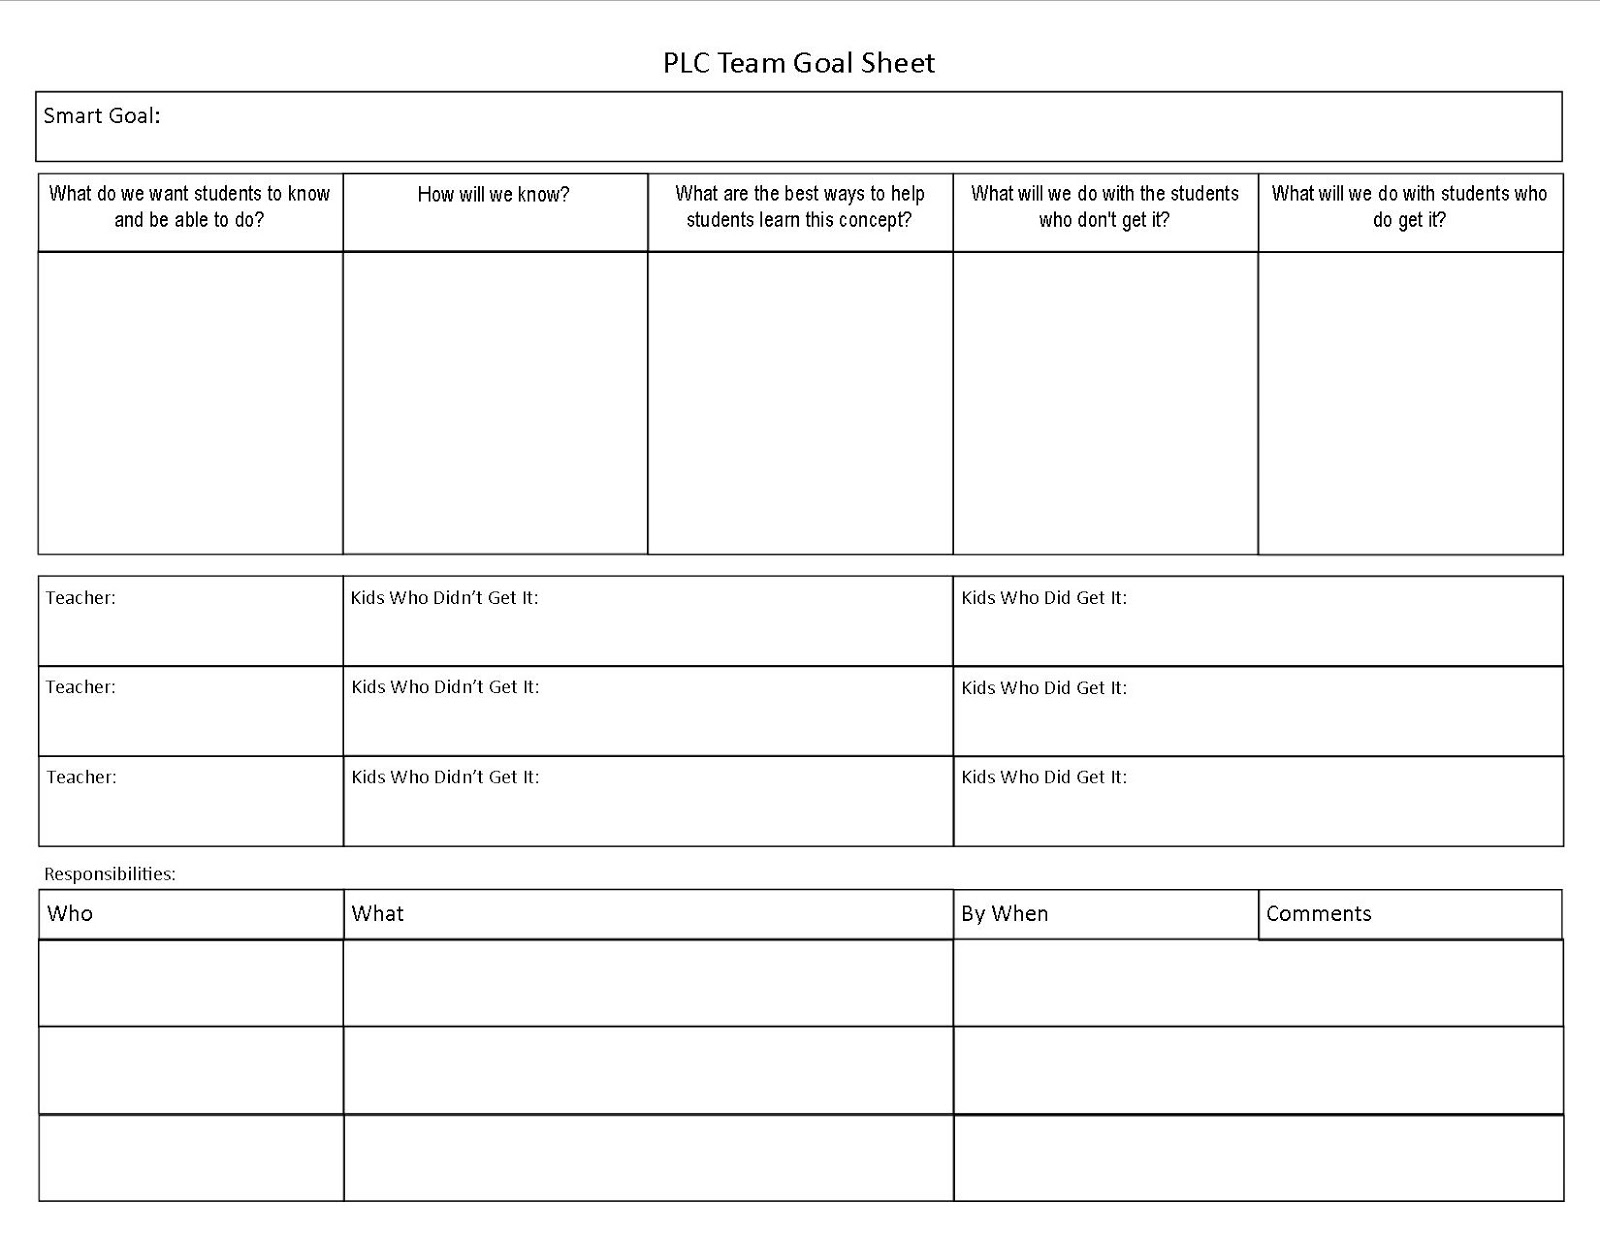 the-idea-cubby-professional-learning-community-goal-sheet